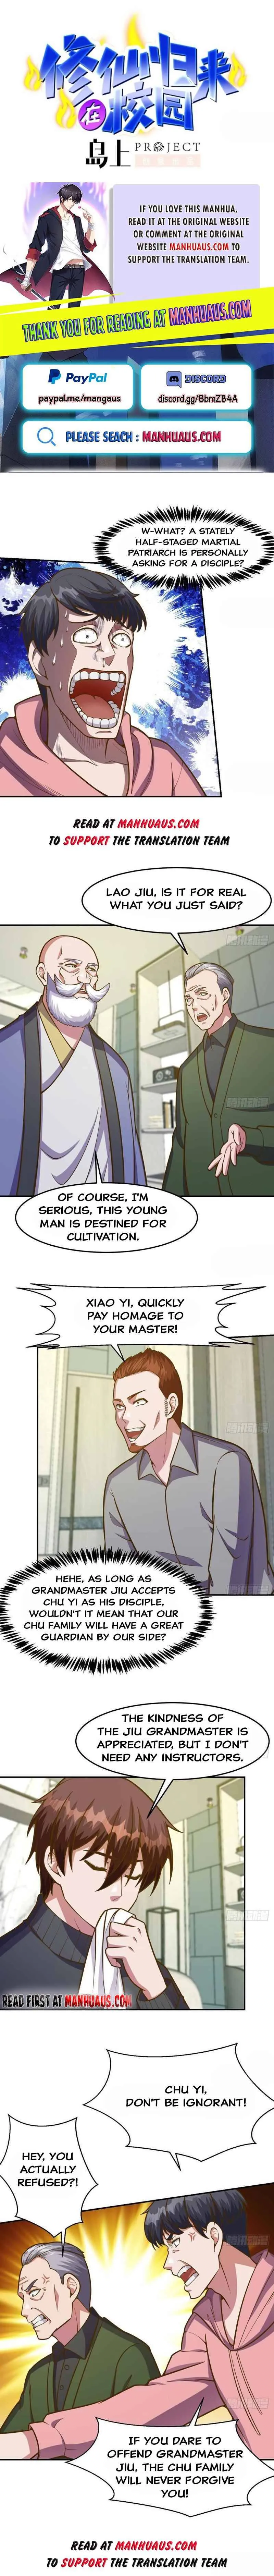 Cultivation Return on Campus Chapter 339 page 1